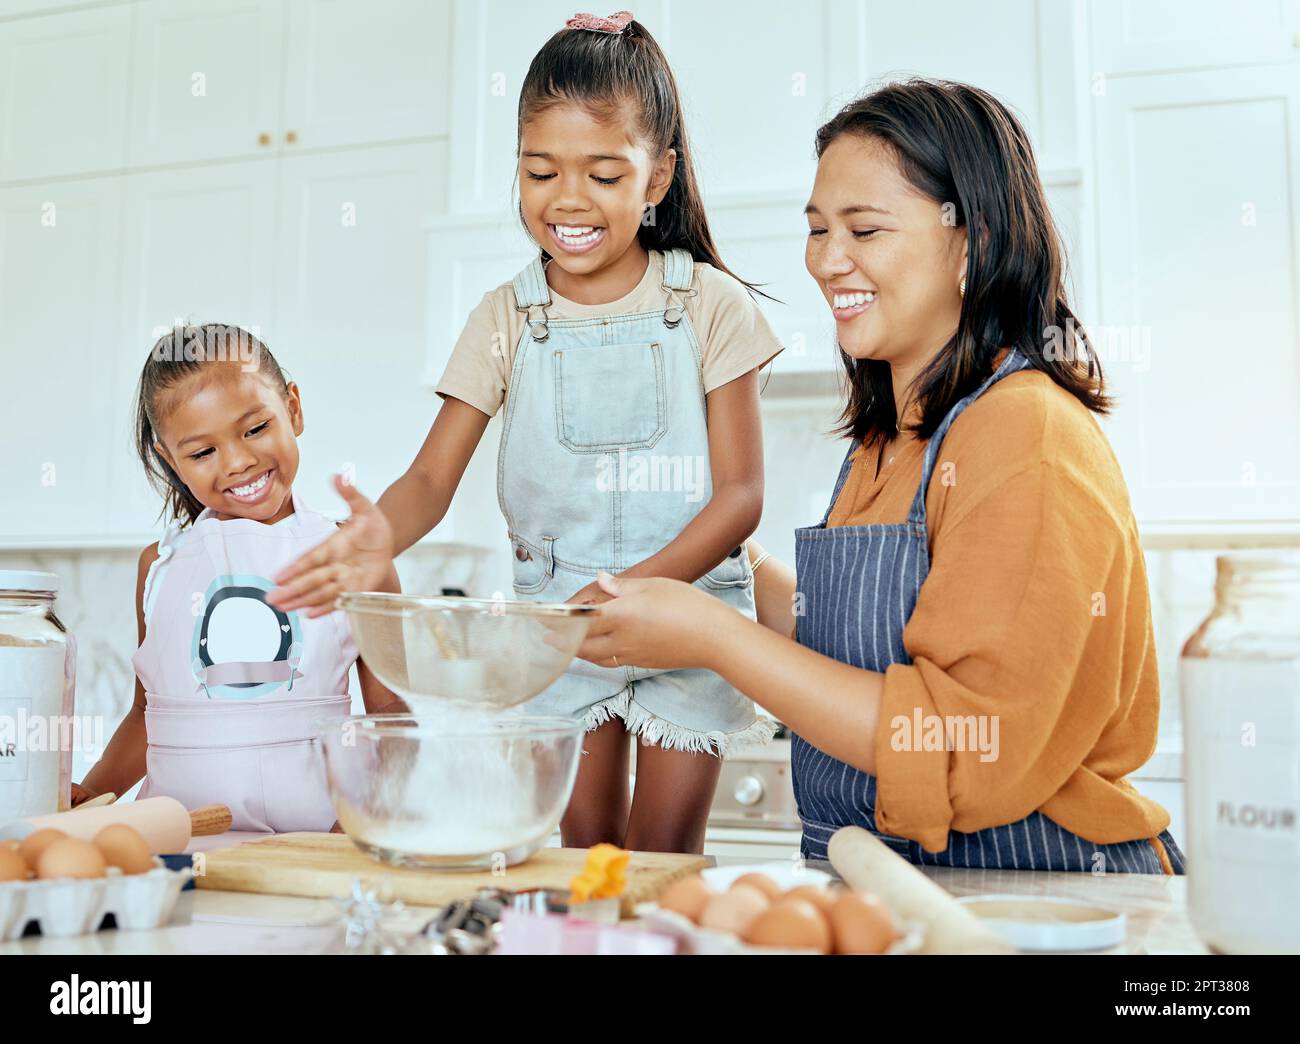 https://c8.alamy.com/comp/2PT3808/happy-family-cooking-mother-and-children-help-mom-with-egg-wheat-flour-and-bake-food-in-home-kitchen-love-youth-kids-teamwork-on-baking-and-enjoy-2PT3808.jpg